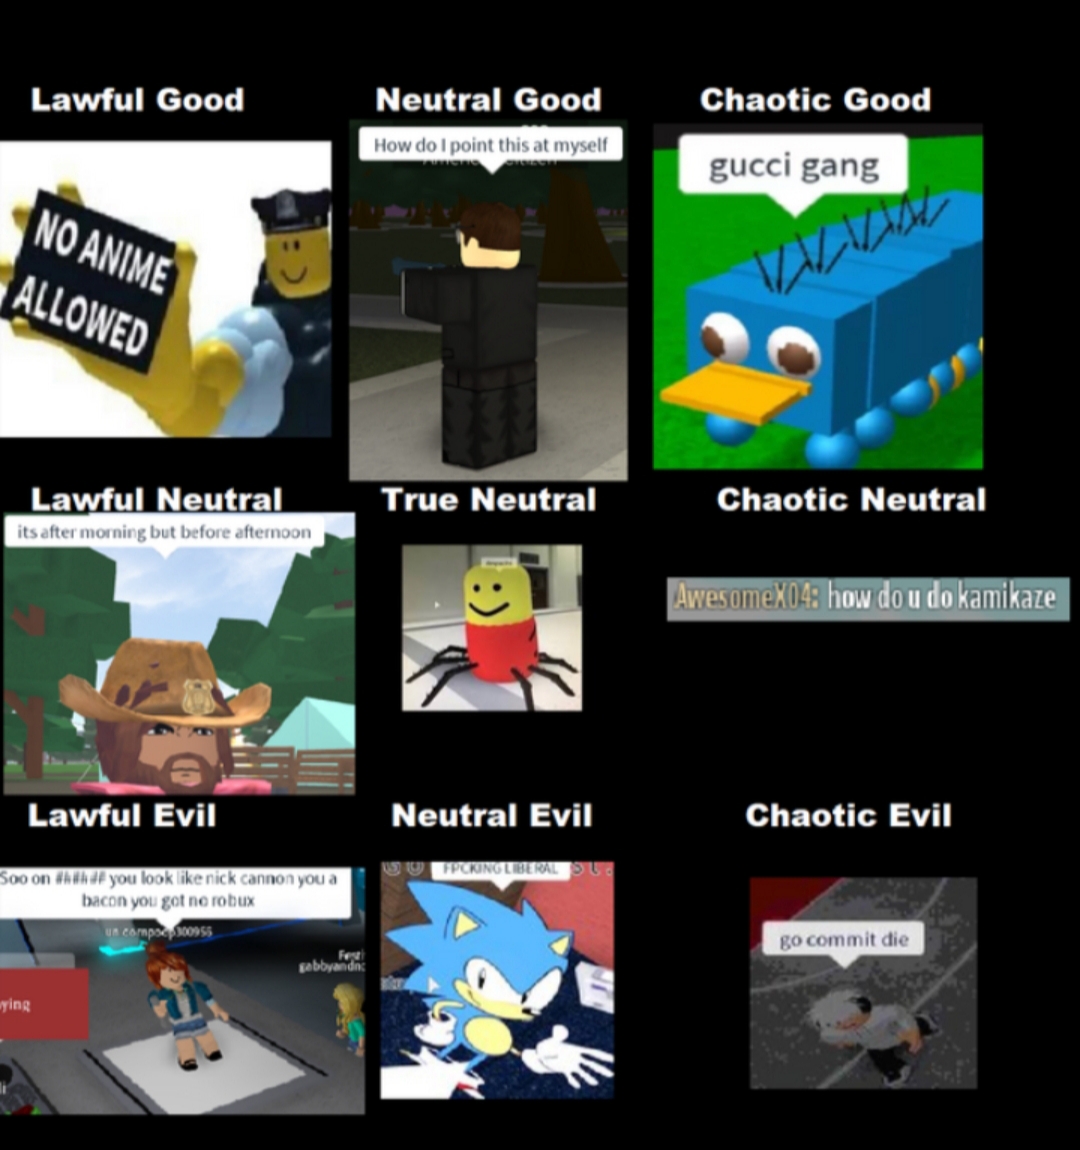 Go Commit Die Alignment Chart By Ericsonic18 On Deviantart - go commit roblox memes